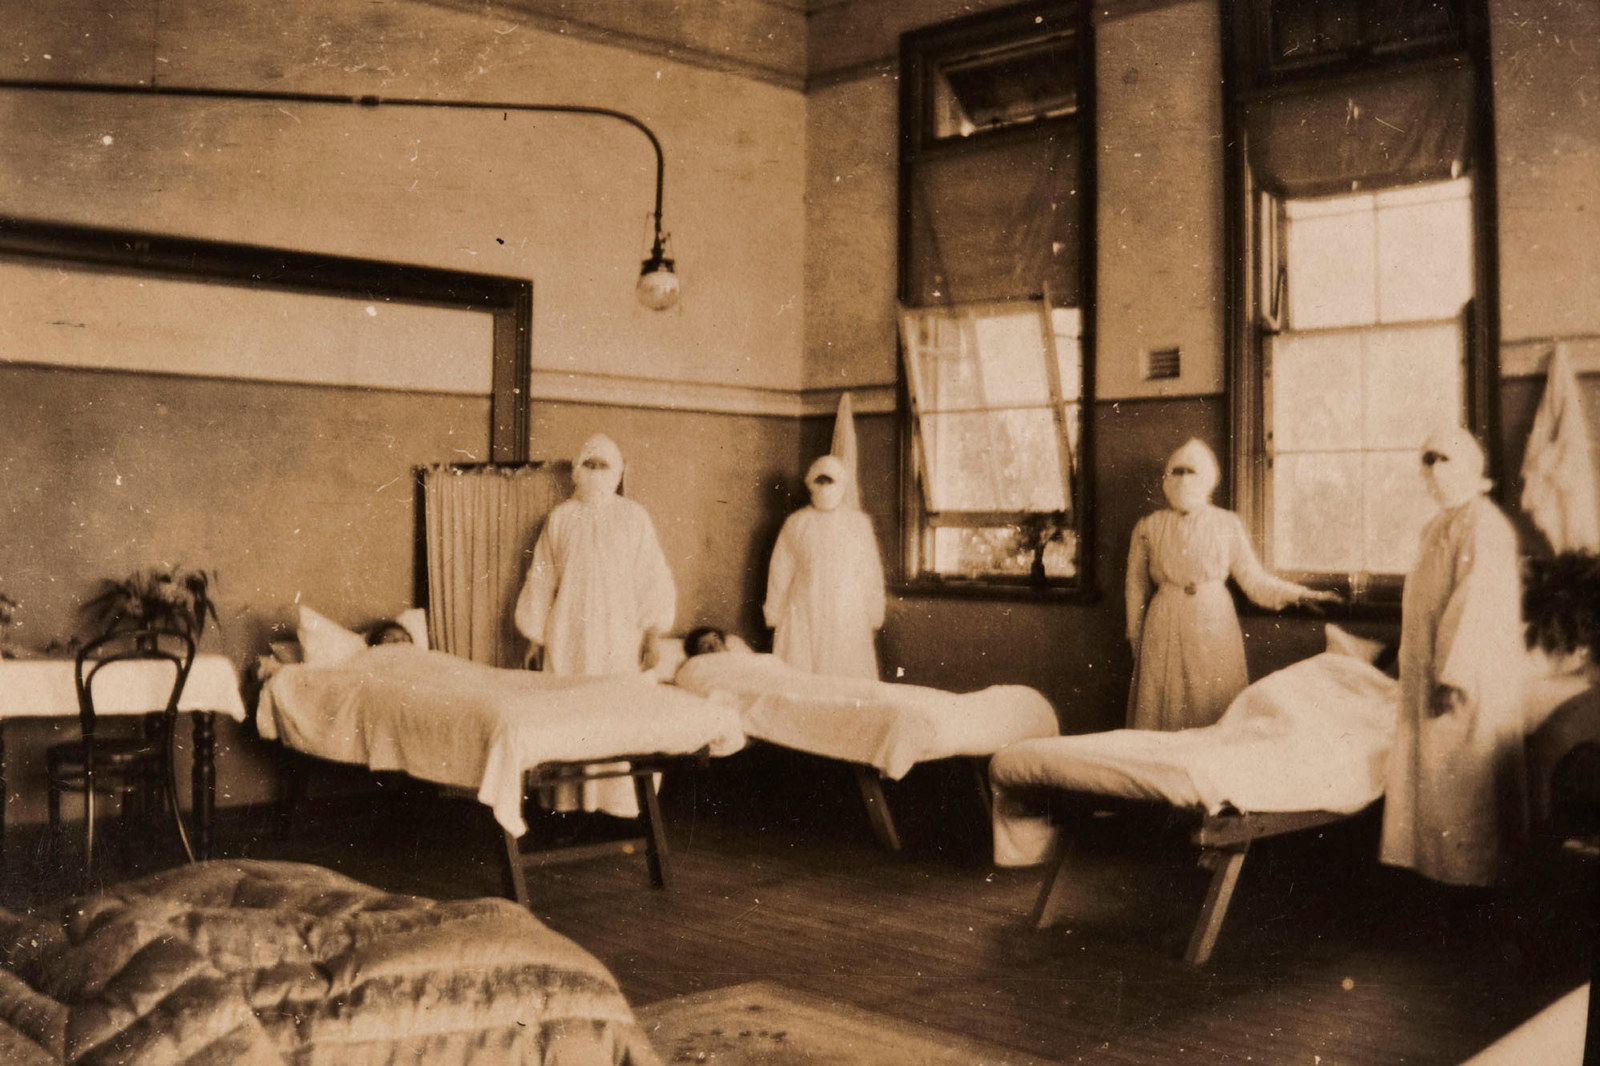 Four women in masks and nurse uniforms in room set up with hospital beds.